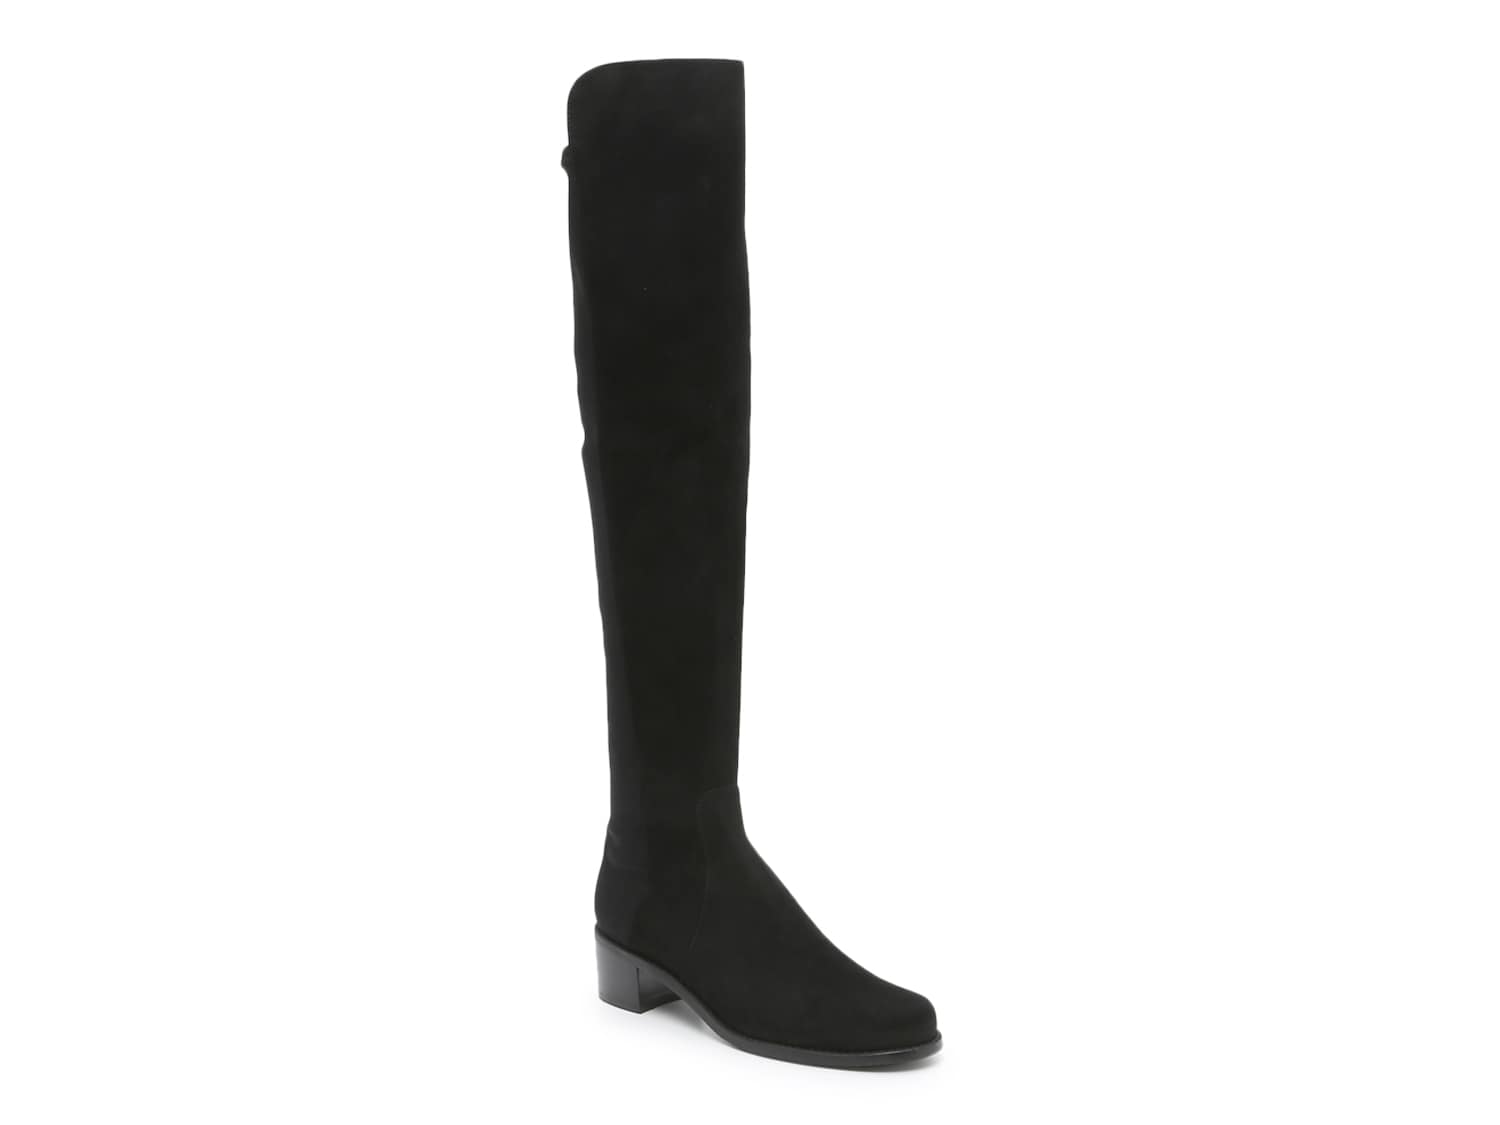 Stuart Weitzman Reserve Over-the-Knee Boot - Free Shipping | DSW